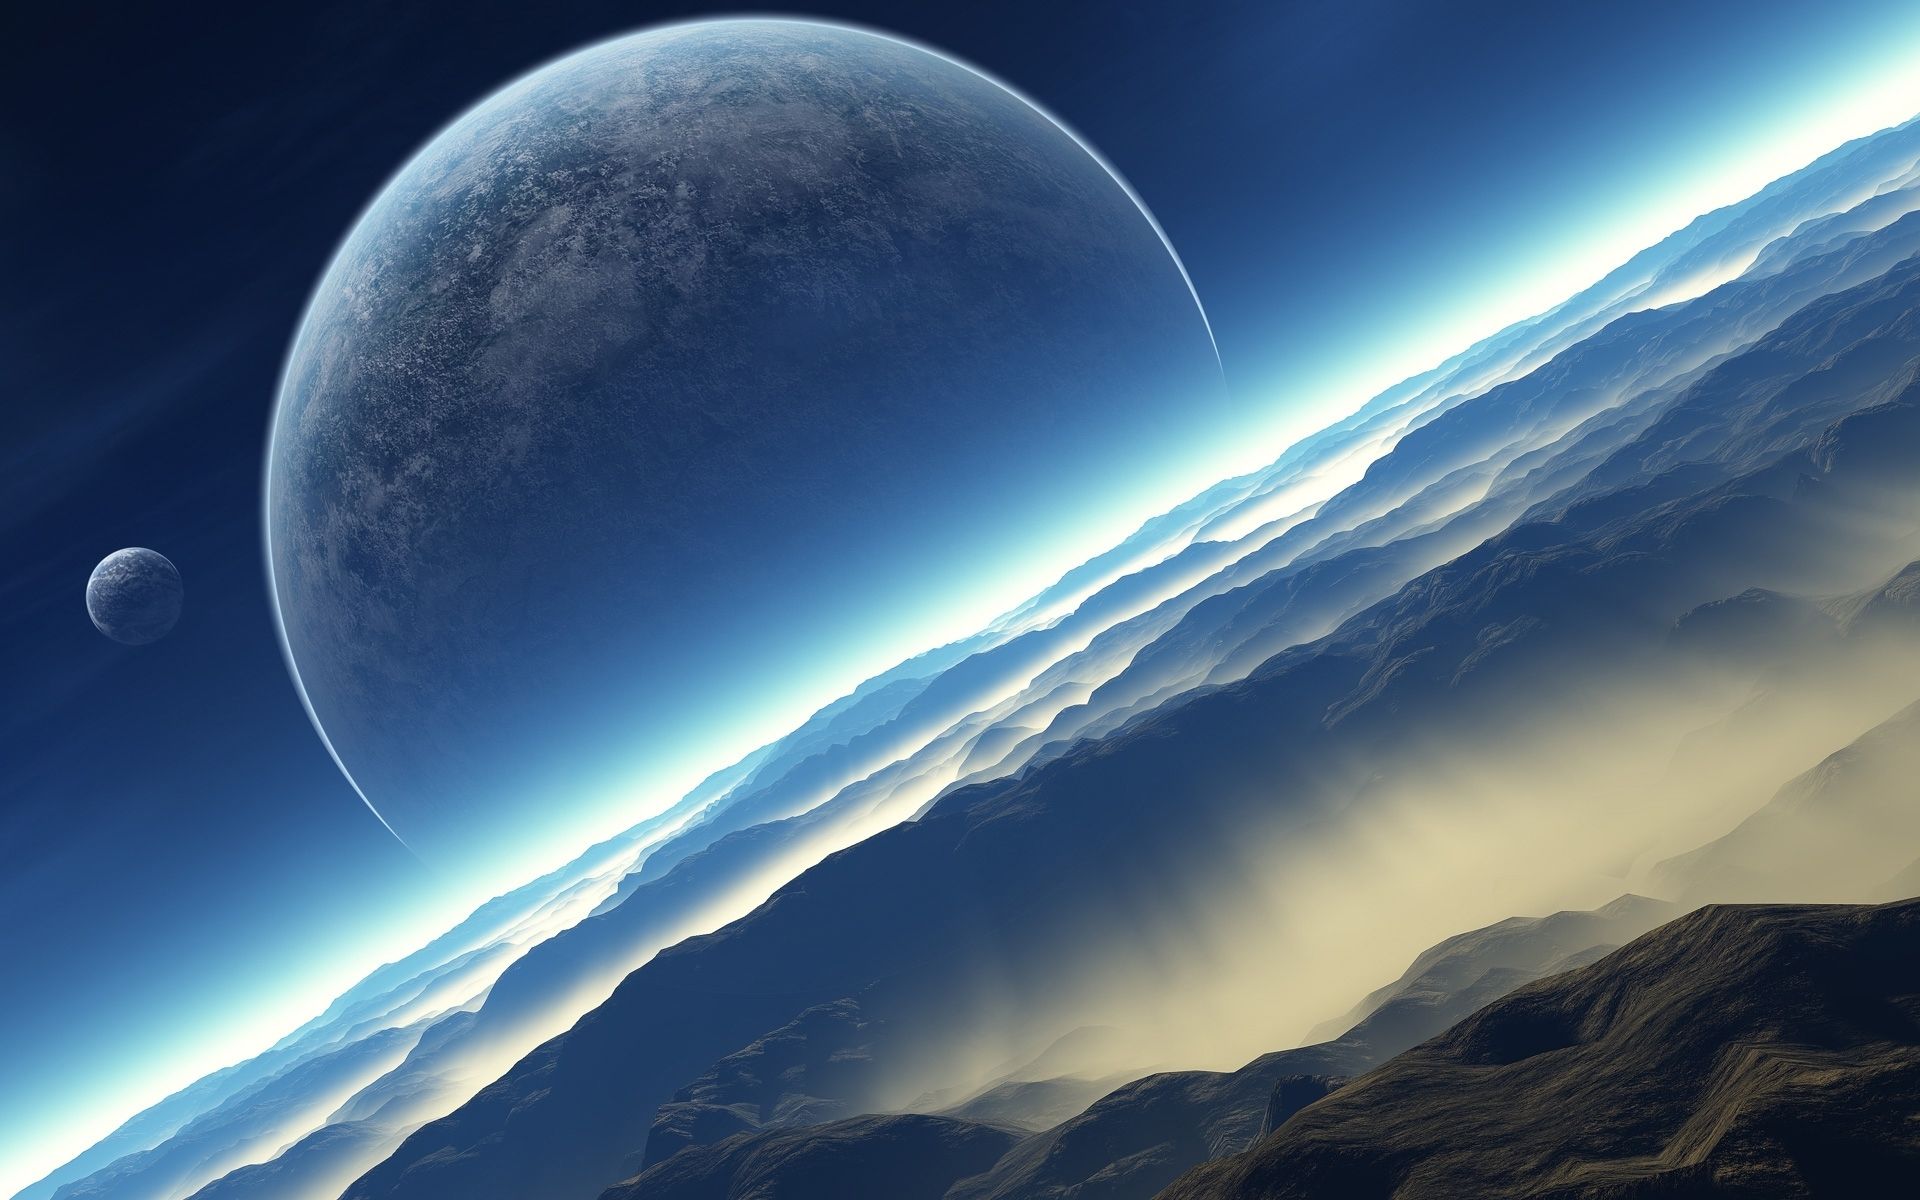 Space HD Wallpaper Realistic and Best Resolution! - Bliz Pix